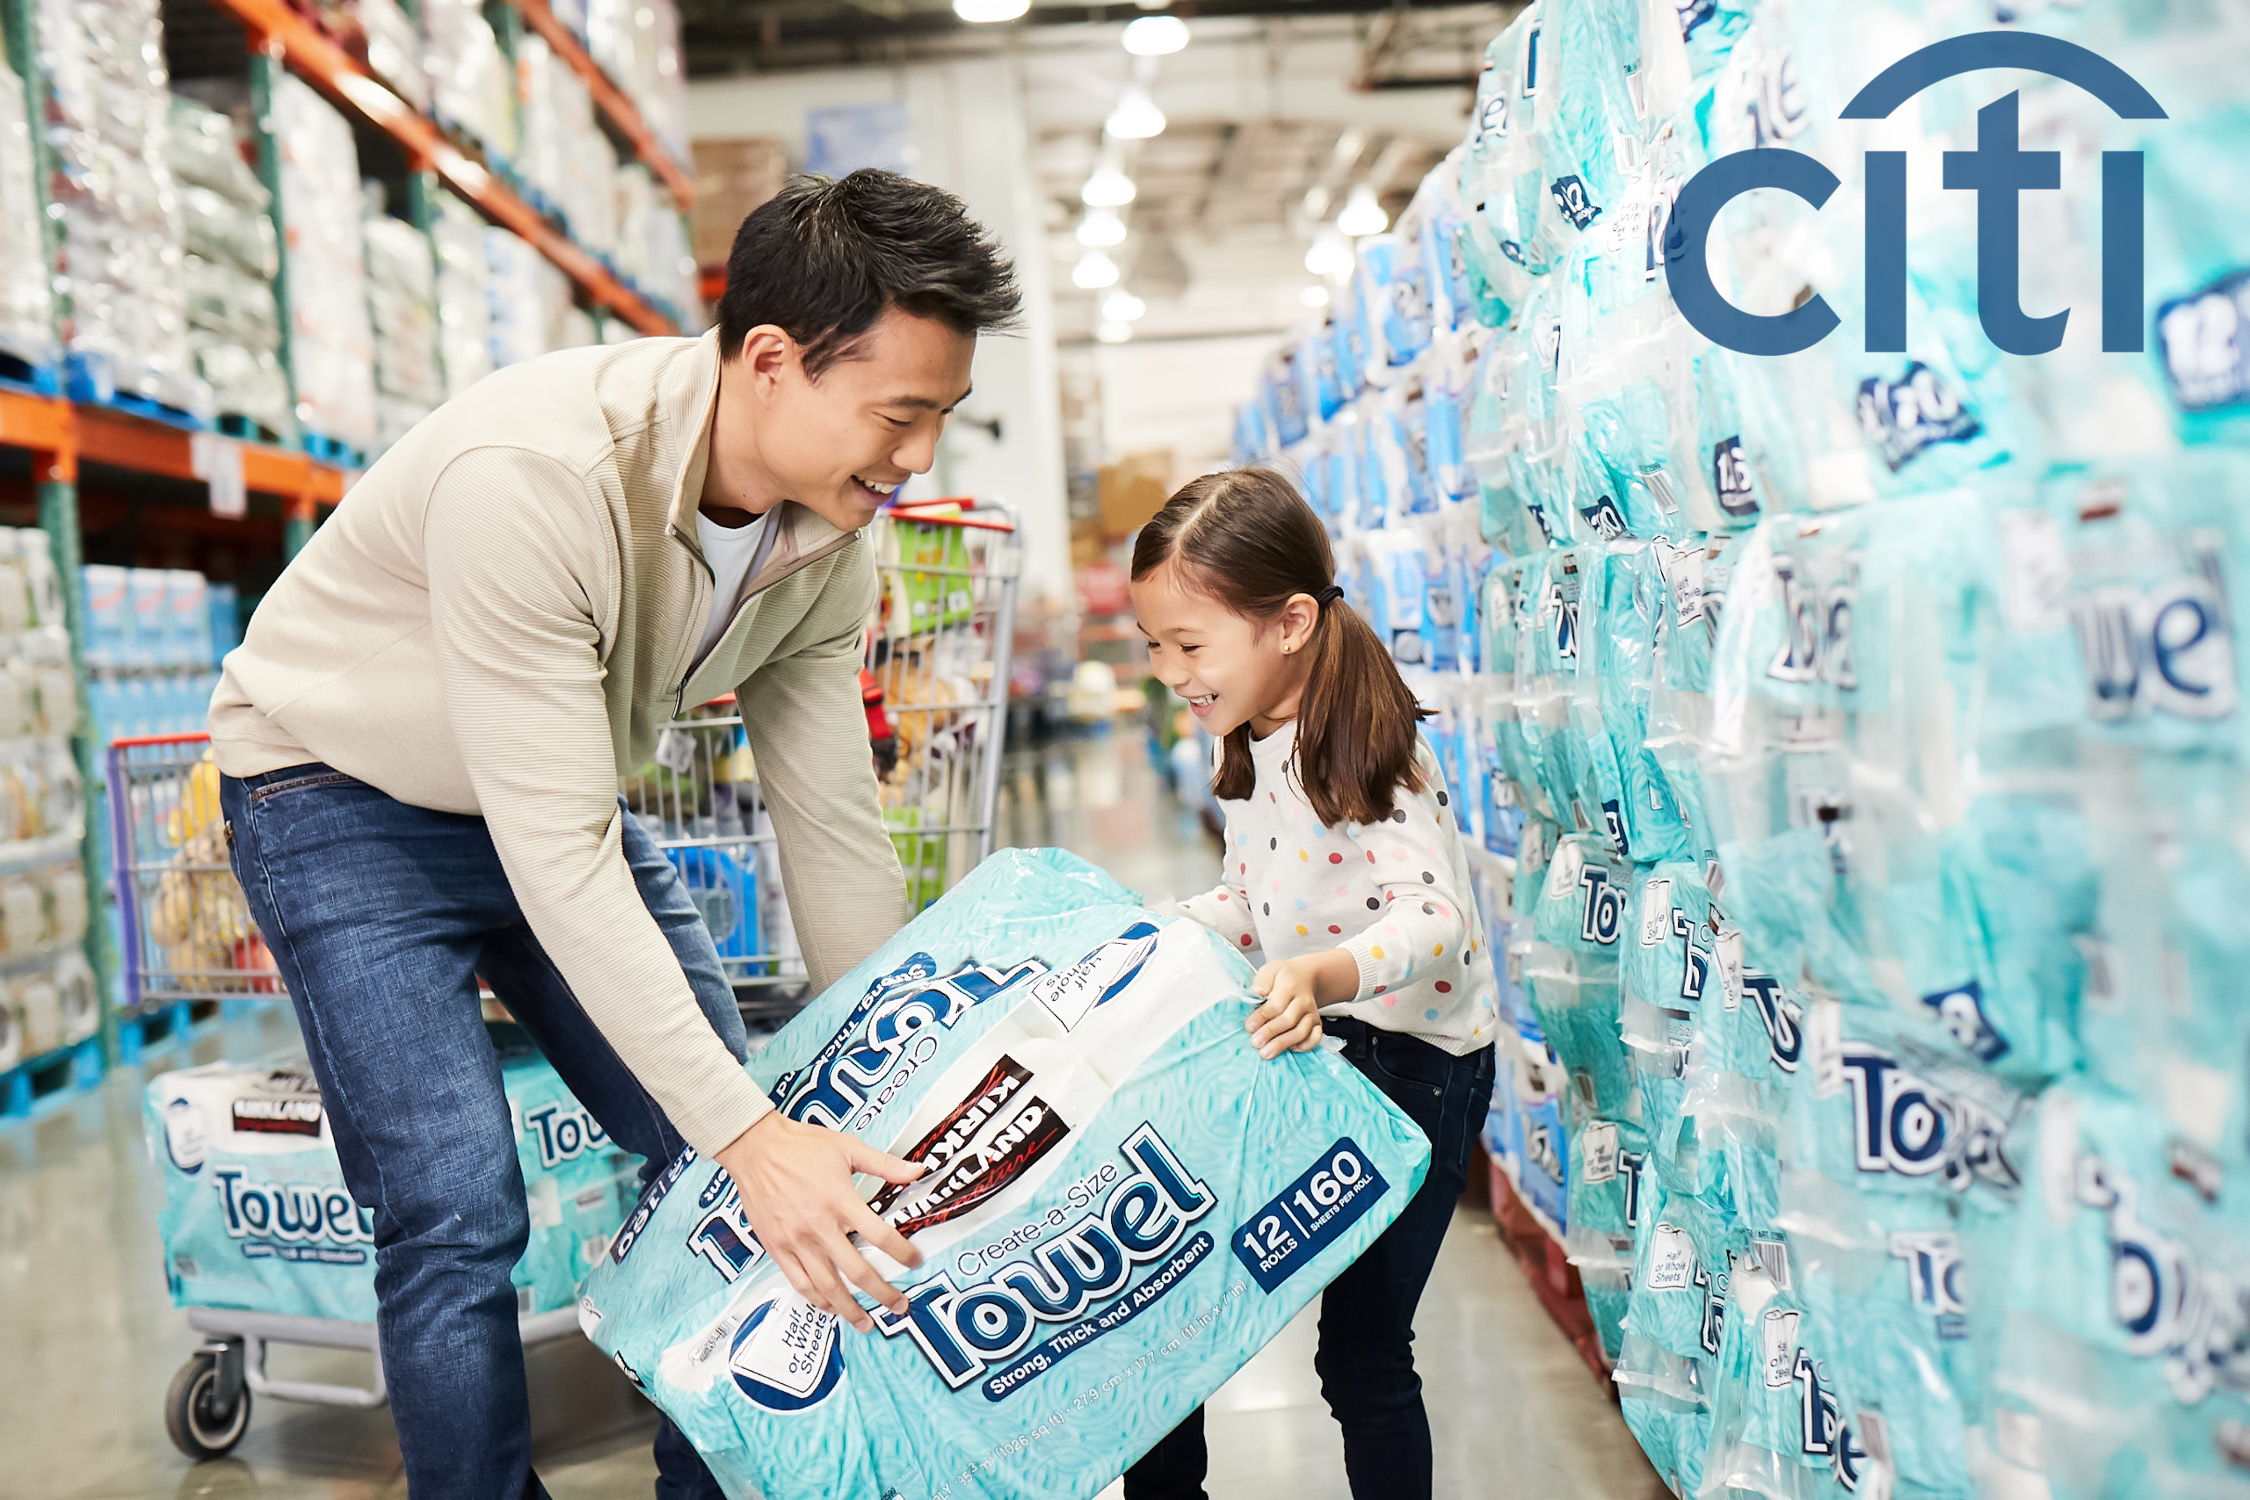 A father and his daughter purchase products at Costco in a Citibank Ad Campaign photographed by Lifestyle Photographer Diana Mulvihill